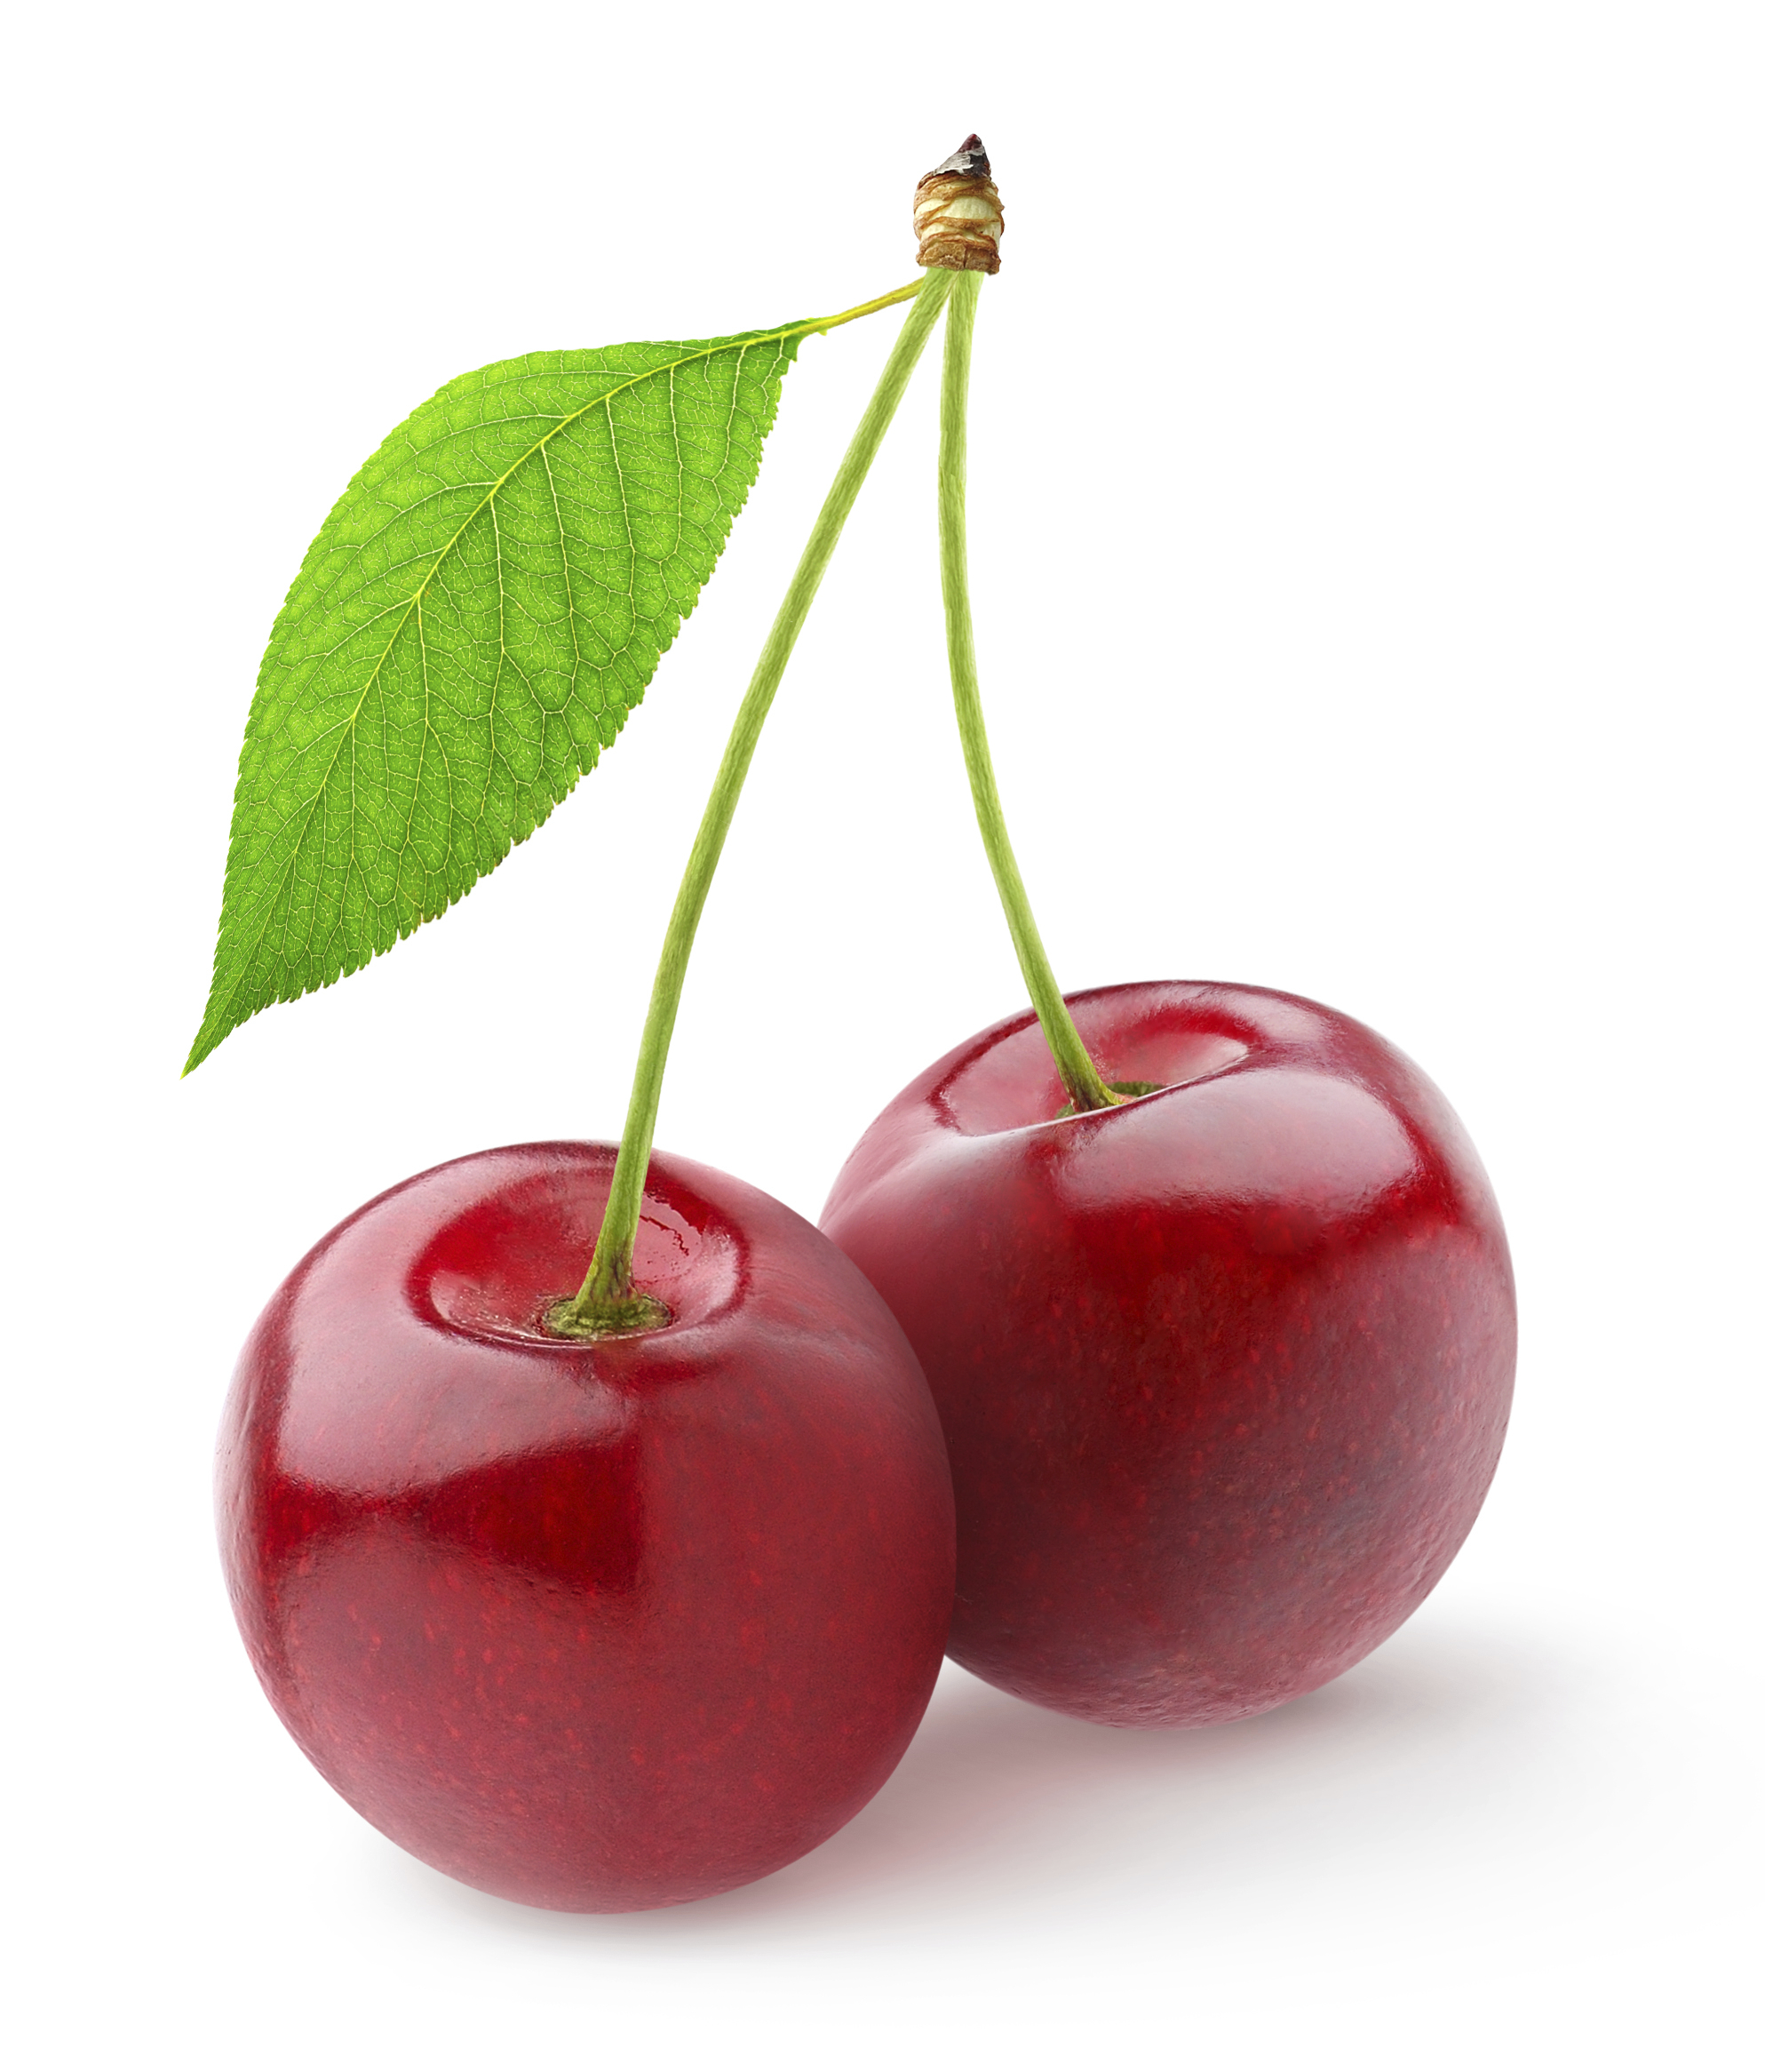 Red Pie Cherries - Bithell Farms